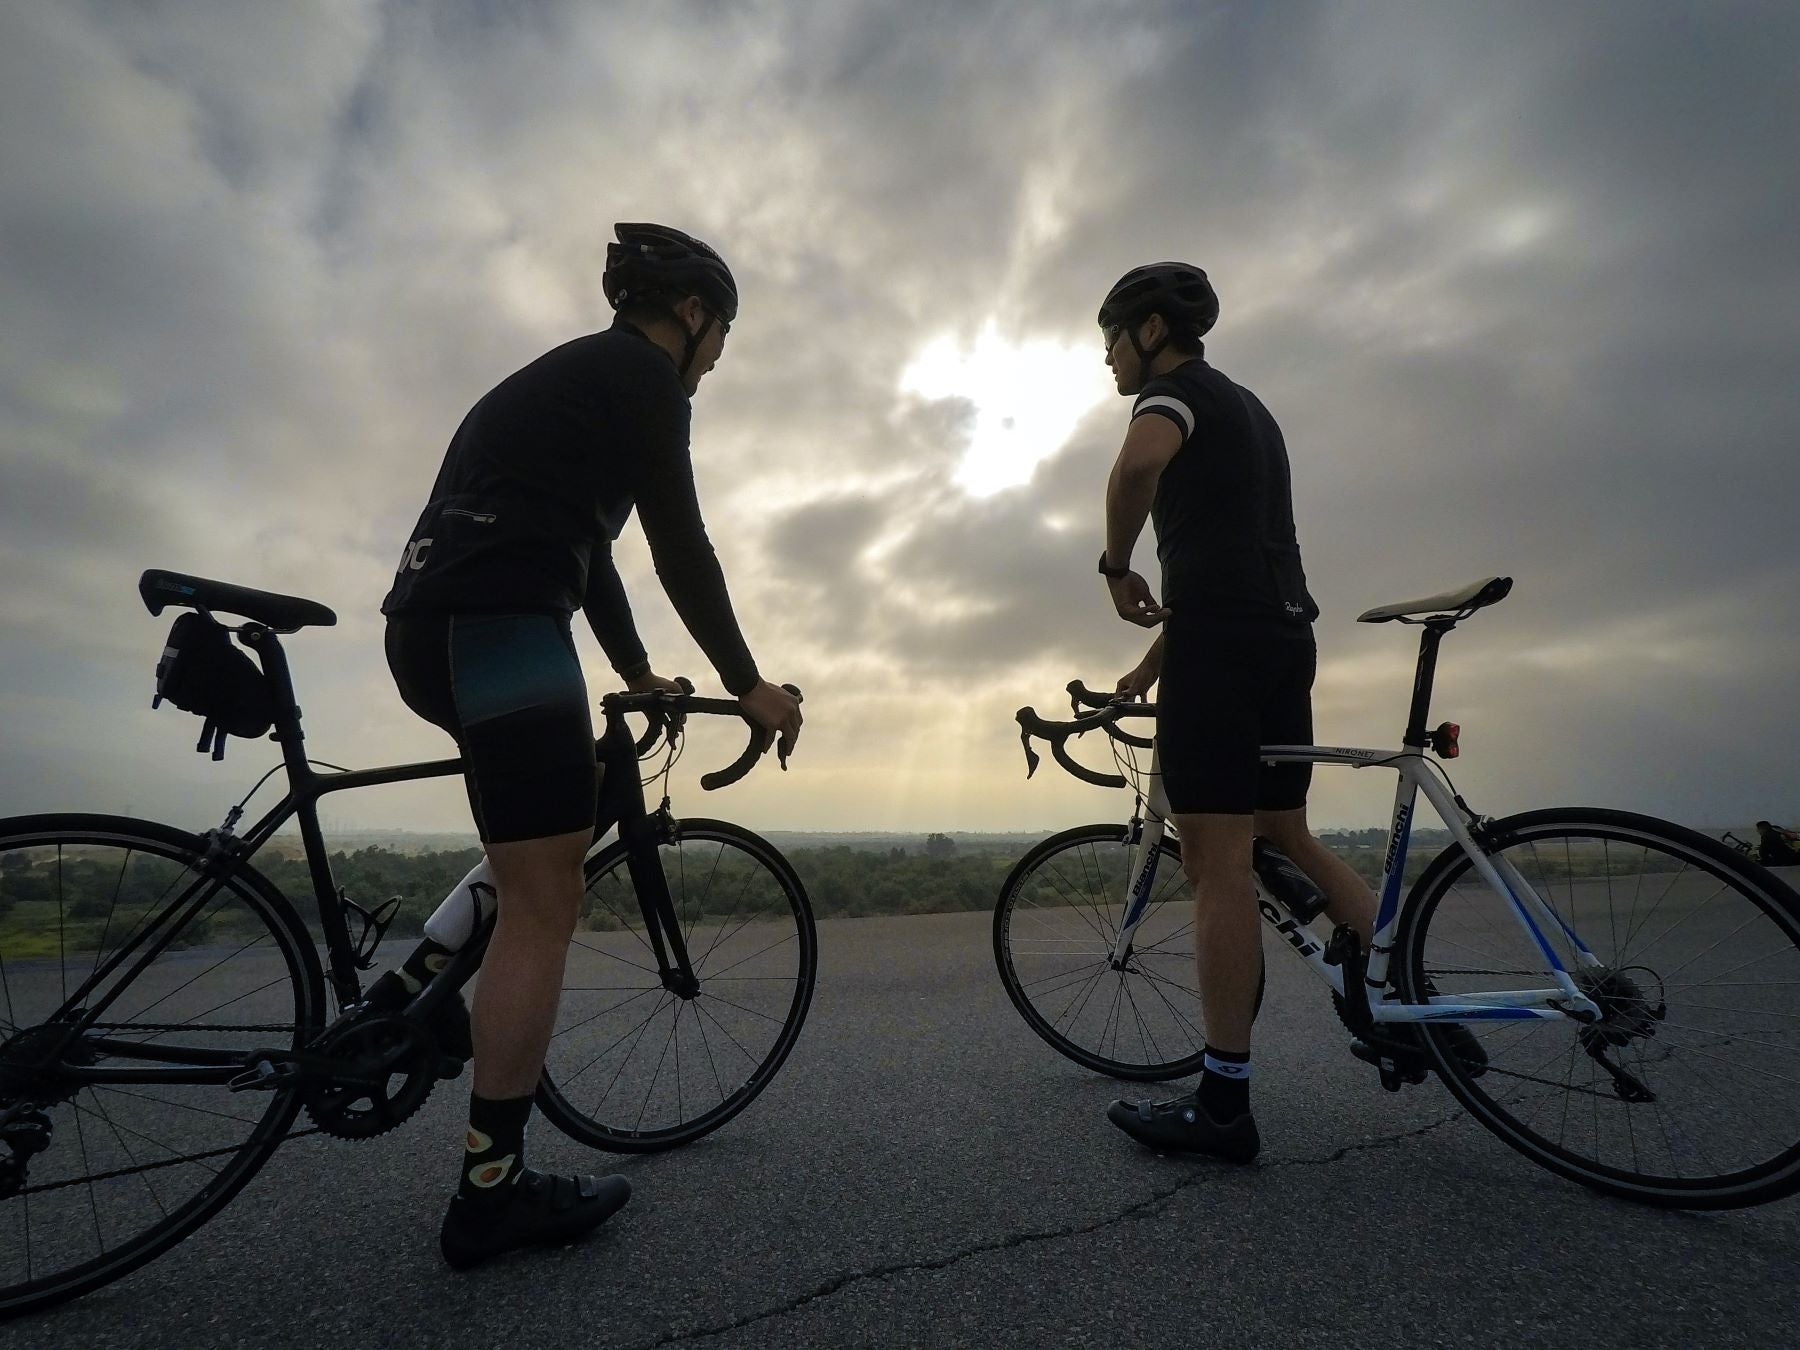 riding with friends to build your confidence